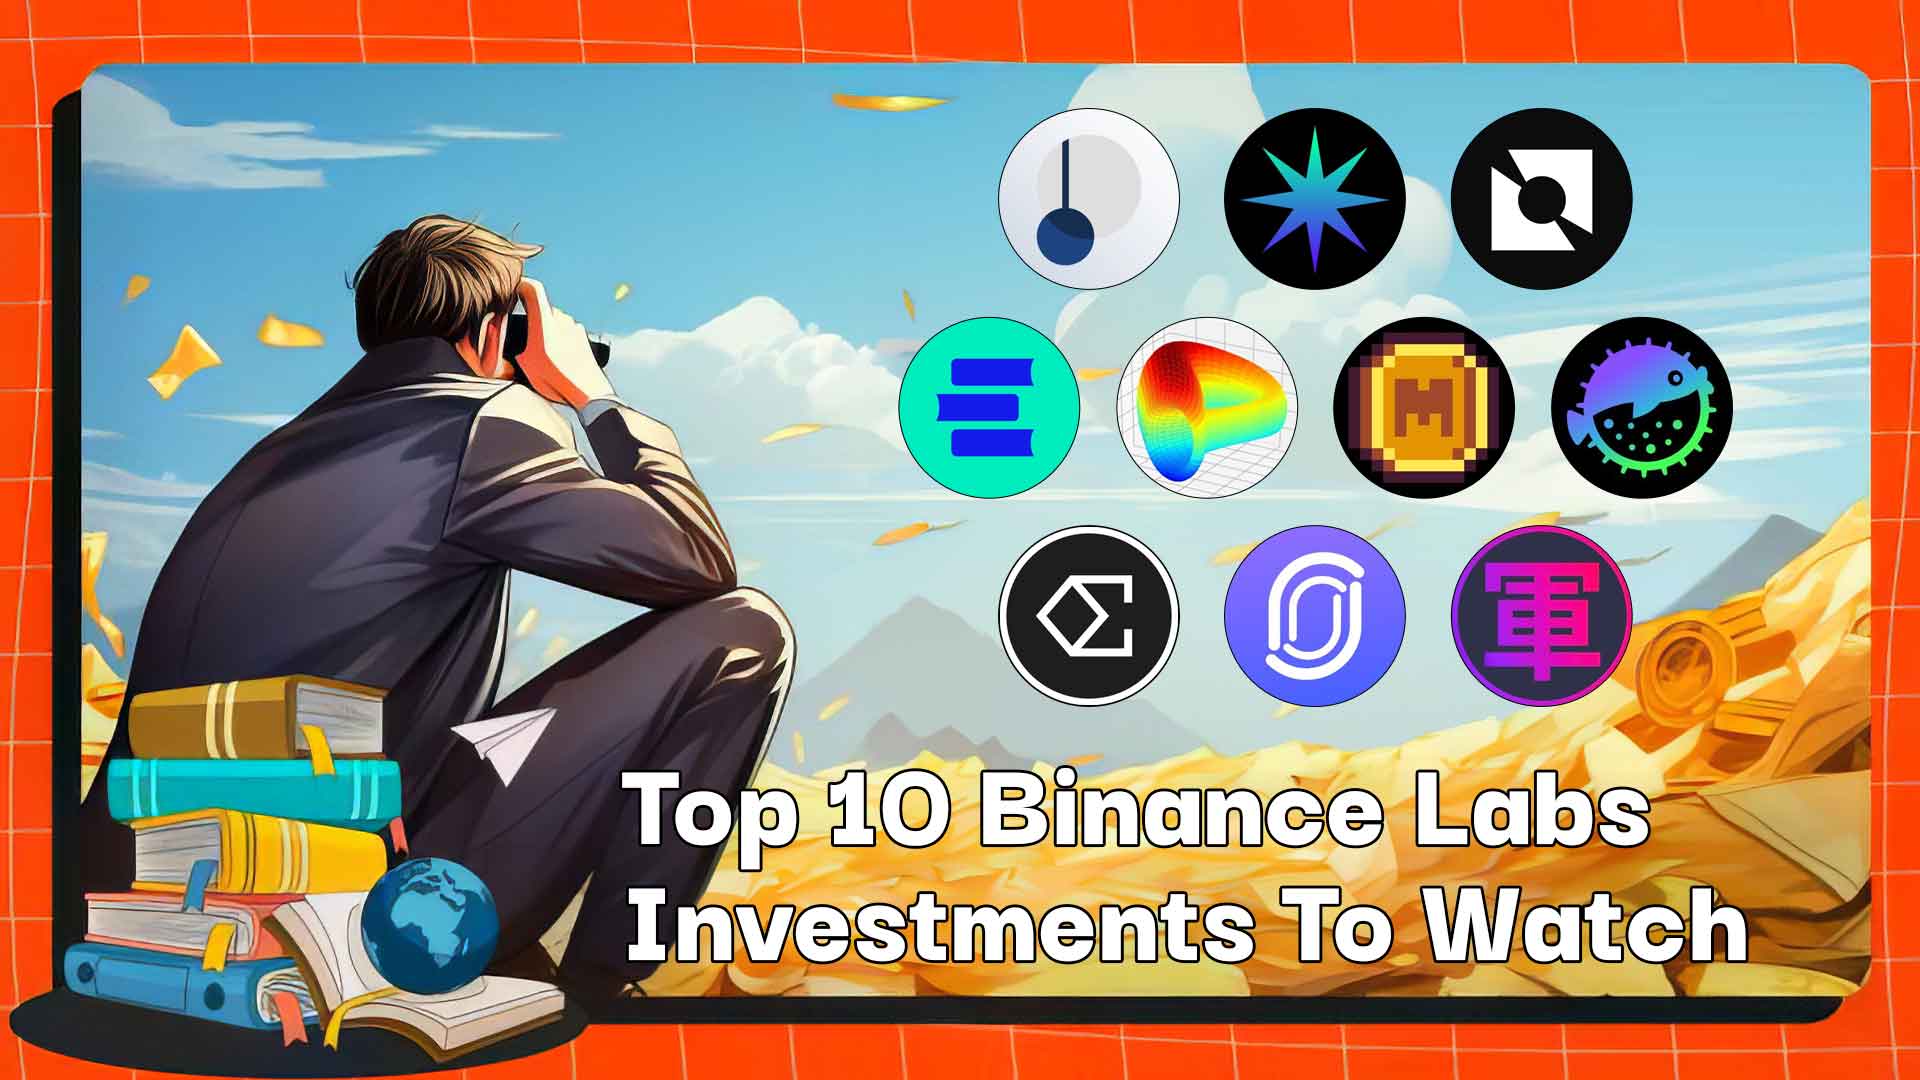 Top 10 Binance Labs Investments To Watch